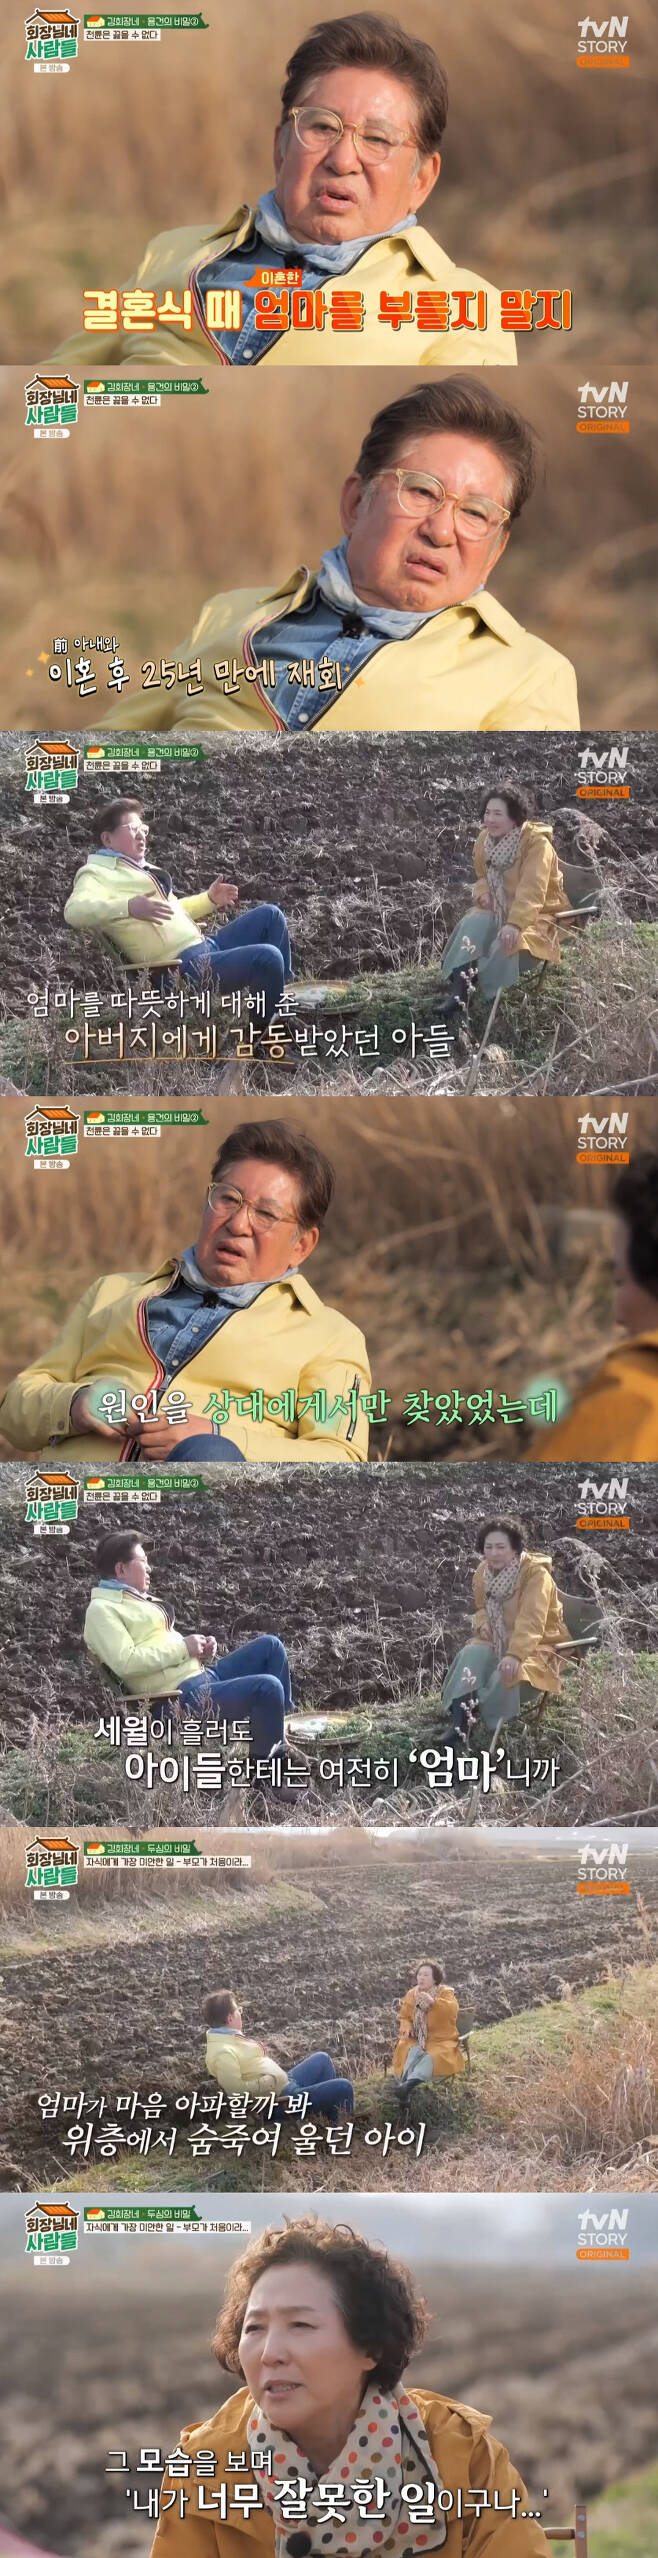 Kim Yong-gun reveals shes reunited with ex-wife after 25 years of divorceIn the TVN STORY Chairpersons People broadcast on the 22nd, the past behind-the-scenes story of Country Diaries couple Kim Yong-gun and Go Doo-shim, who spend their spare time in about 20 years, was revealed.On this day, Kim Yong-gun said, Ye Olden Days, Na Moon-hee tried to play an intermediate role between me and Go Doo-shim.Because Na Moon-hee knew that I liked Go Doo-shim. He confessed that he had a crush on Go Doo-shim in the past.Go Doo-shim said, I did not think of my brother as a husband because I did not like it because I was too snooping around. I did not like it because it did not seem to be mine.Kim Yong-gun said, I did not play a lot, but rather people who played it say that they live a more stable life when they get married.Later, while recalling memories of Country Diaries, Kim Yong-gun recalled what he had done in the play.Kim Yong-gun explained, Its all a misunderstanding, but Go Doo-shim was excited, saying, Anyway, I dont like any wife who meets other women besides me. Its the thing I hate the most.Kim Yong-gun said, I think I deviated because I was frustrated because I was living in a stereotyped workplace. Even if I sold it for a while, he explained. Then, why do I make excuses like this?I think there really was something there, he said with a smile.Go Doo-shim recalled what he had experienced at the airport in the past after shooting Kim Yong-gun and province, he said, I took provincial shots and ended up late, so I stayed overnight and flew back.At that time, my husband came to the airport and I was jealous when I saw them coming out. Kim Yong-gun greeted me with a warm greeting and asked me to go to me without looking at me. Kim Yong-gun said, (Go Doo-shims husband) shook his head. How embarrassed must I have been? Then he met me and asked me why I did not accept greetings.Go Doo-shim smiled, saying, At that time, my husband looked attractive and cool because he did it as a man.Kim Yong-gun described his relationship with Go Doo-shim as fateful and said, I have been married for 20 years and divorced. In Country Diaries, I have been married for 22 years.And the mother of the children is Ko, and I met Ko again in Country Diaries. Ko said, There is only one Jeju Ko, which is also fateful. Go Doo-shim said, It is so funny.Then Kim Yong-gun said, Nagado Ko, even if you come in, and burst into laughter.On the other hand, Kim Yong-gun confided in his reunion with his ex-wife at the Wedding ceremony of his son Yeong-Hoon Kim and Hwang Bo Ra.He said, This time, when my second son gets married, he asked me if I should call my mom during the wedding ceremony.And I met at Wedding ceremony, and after 25 years of divorce, I was reunited. He said, I was sick because I heard that my health was bad.The next day, Second heard the story and said to me, Thank you so much, Dad. He told me that he gave me a word and warmed me up. Kim Yong-gun also said, At that time, I thought I had a lot of shortcomings, so I only thought about my heartache and thought there was nothing wrong with me. But Im a mother to my kids. (The kids) keep in touch. Why wouldnt they? I know everything.Then Go Doo-shim said, When Jung Woo gets married, sit together, and Kim Yong-gun joked, Come with me when Jung Woo gets married. Sit next to me on both sides.Go Doo-shim said, We do not have to hurt children because of us.Its our job, he said. Ye Olden Days, after the divorce, when the childrens father came home and had time to spend time with the children, the son said, Father, goodbye and went upstairs and closed the door and cried.Its our job, but what are the children guilty of? (Second) Jung-hwan has become more shy because he doesnt have Fathers energy. Fathers absence is too big. He should have a father, he said.